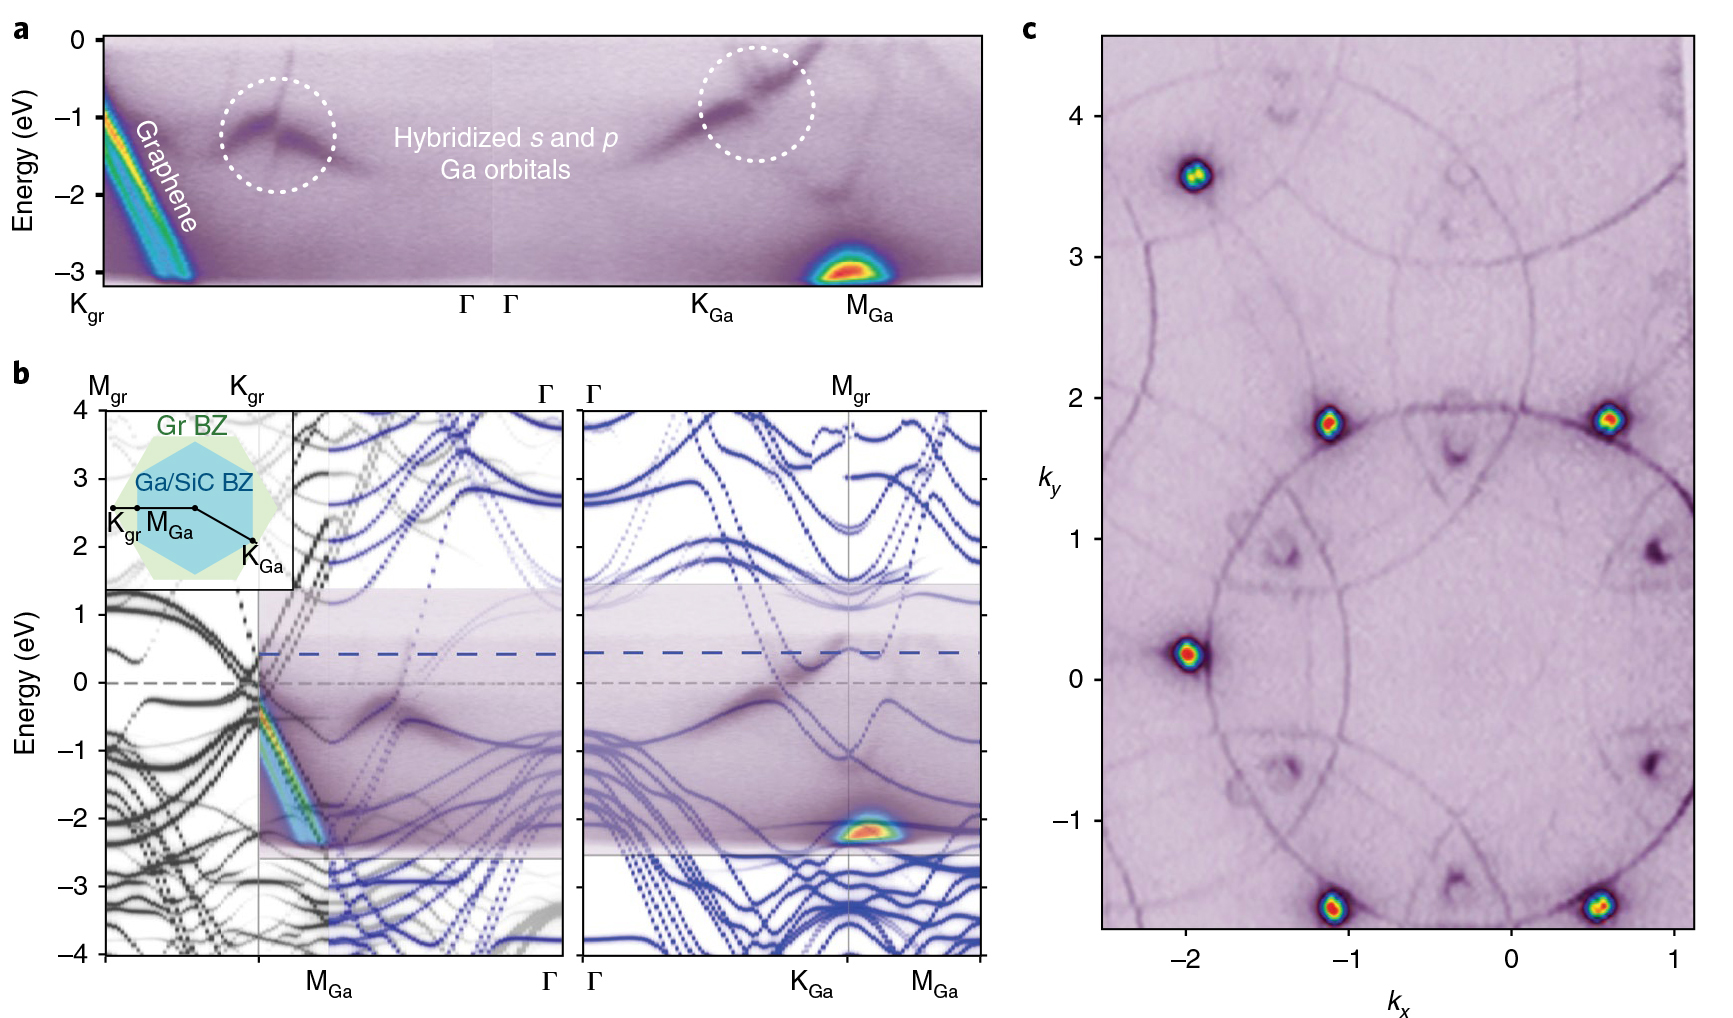 (a) ARPES data showing purple contours for Ga-derived data. (b) Comparison of ARPES data with calculated band structure. (c) Circular ARPES contours.